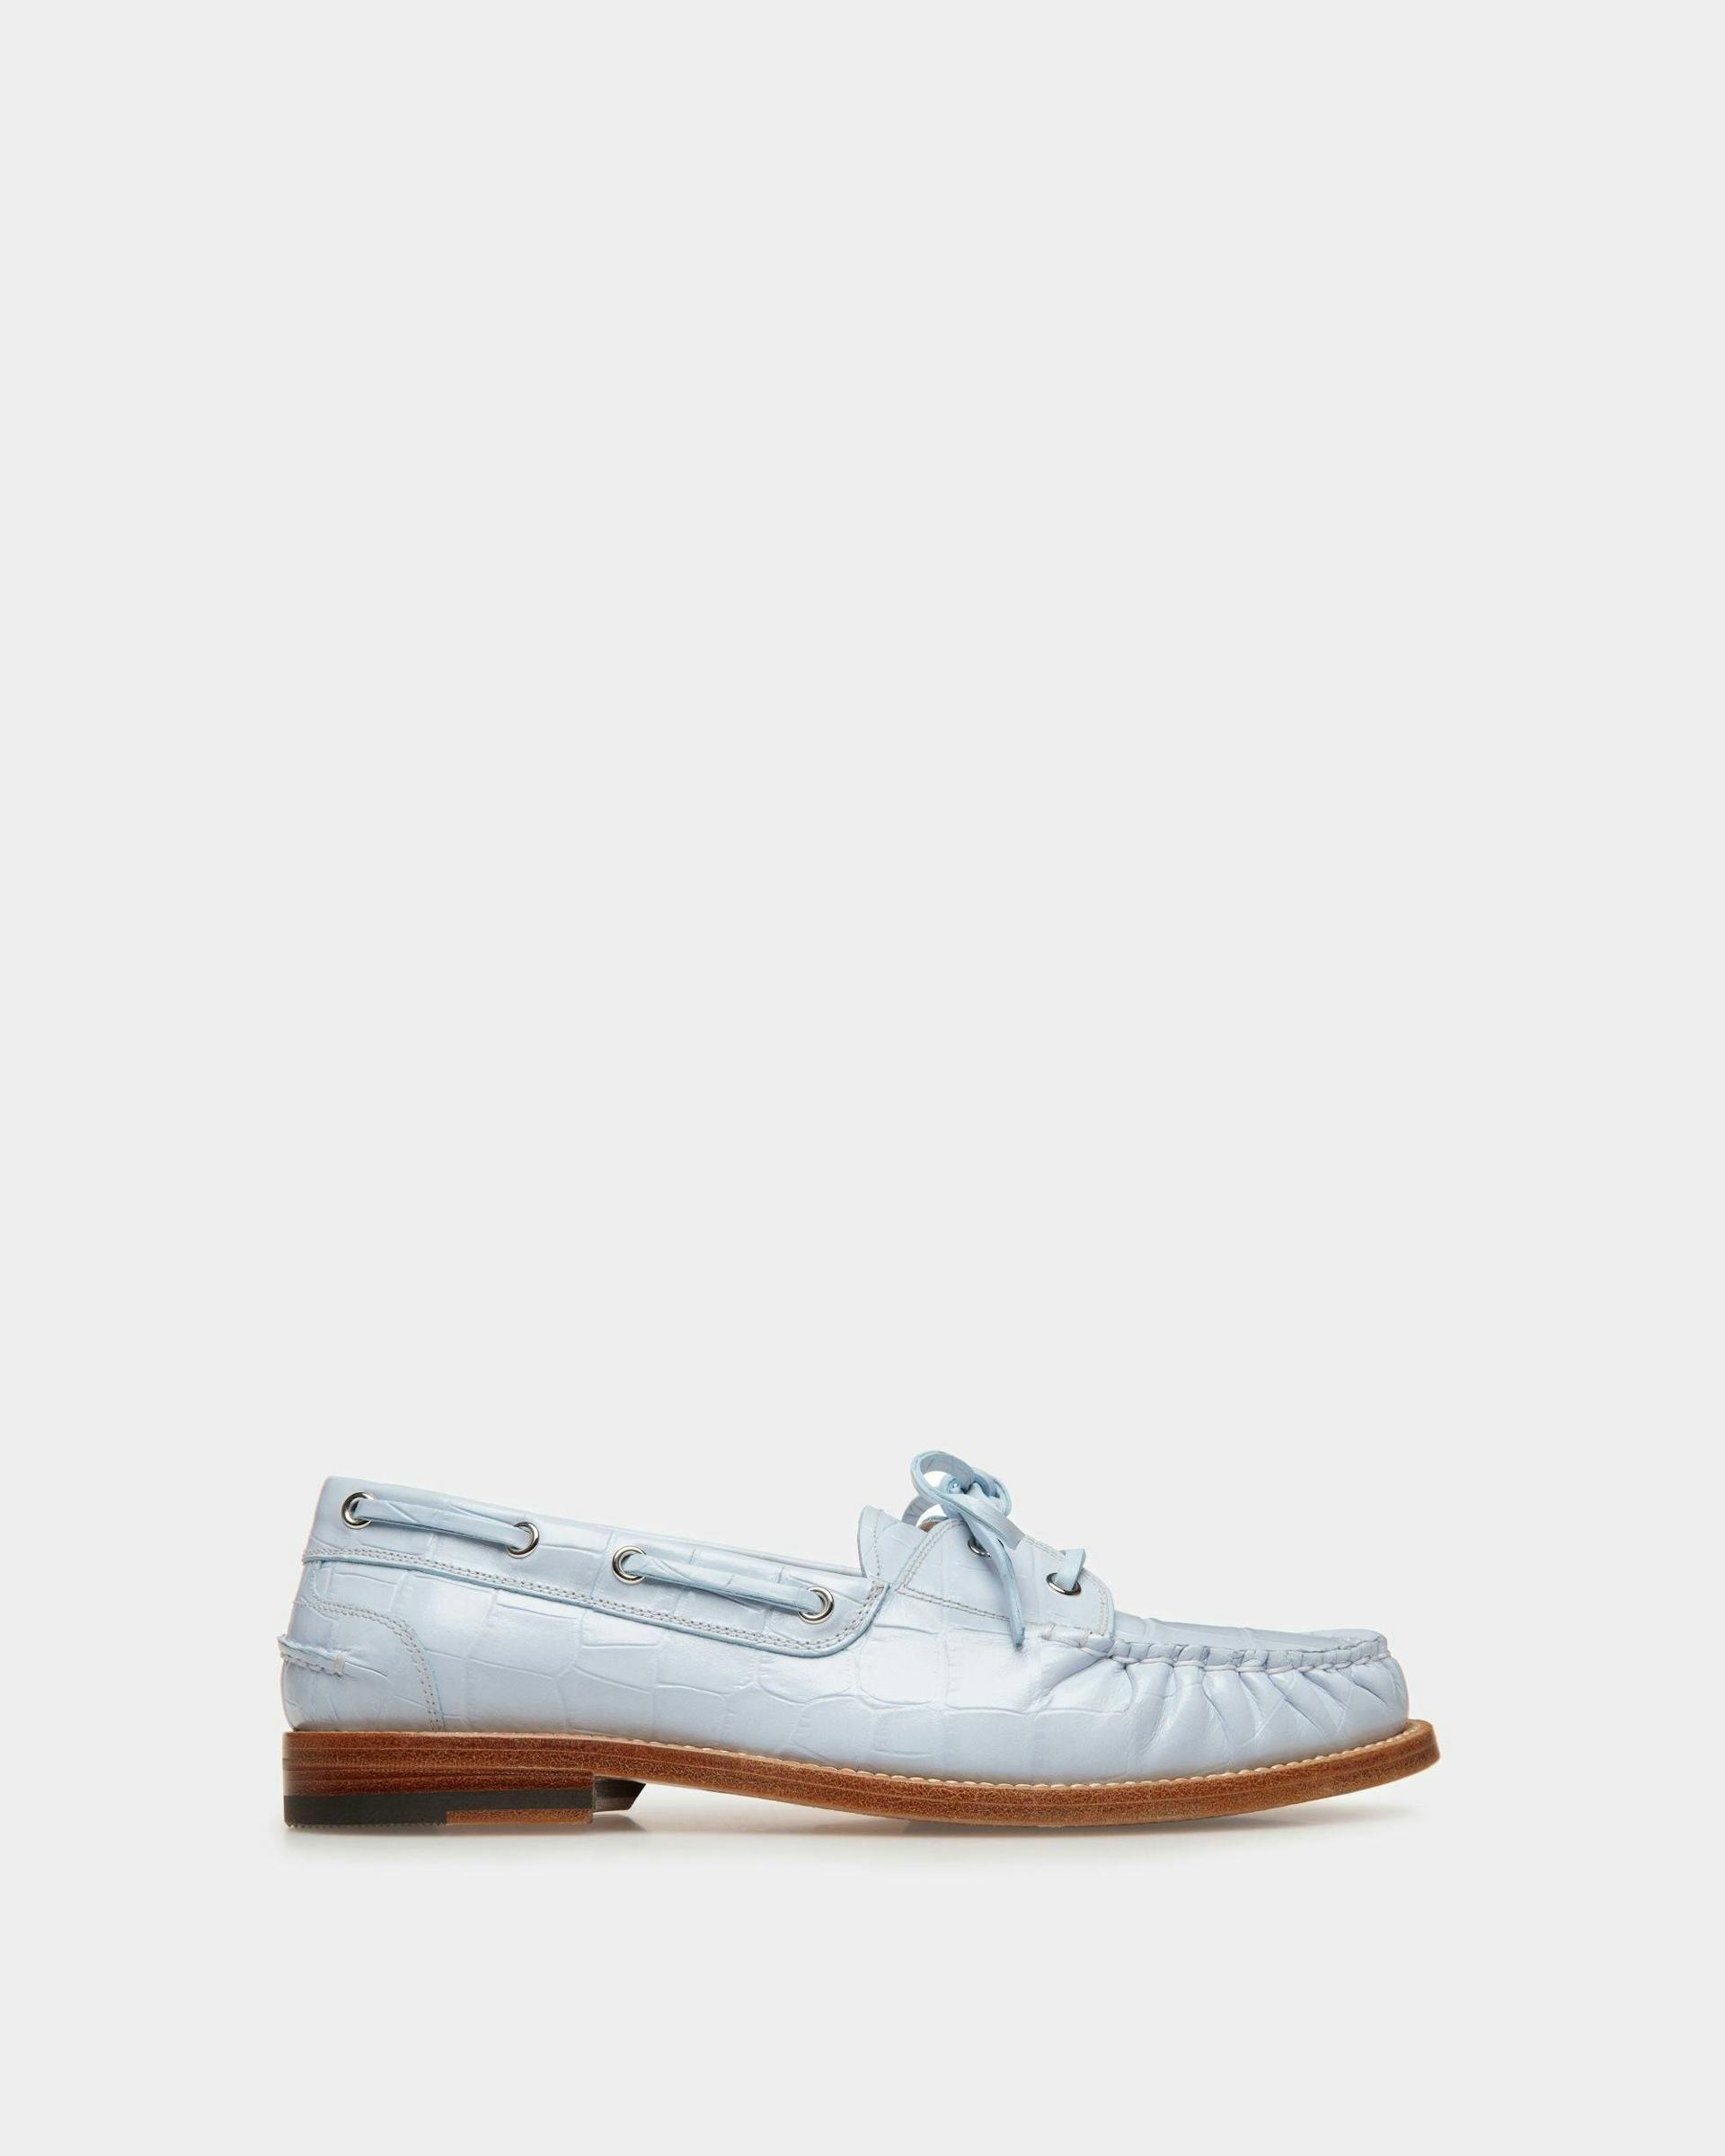 Rome Moccasins In Light Blue Leather - Women's - Bally - 01